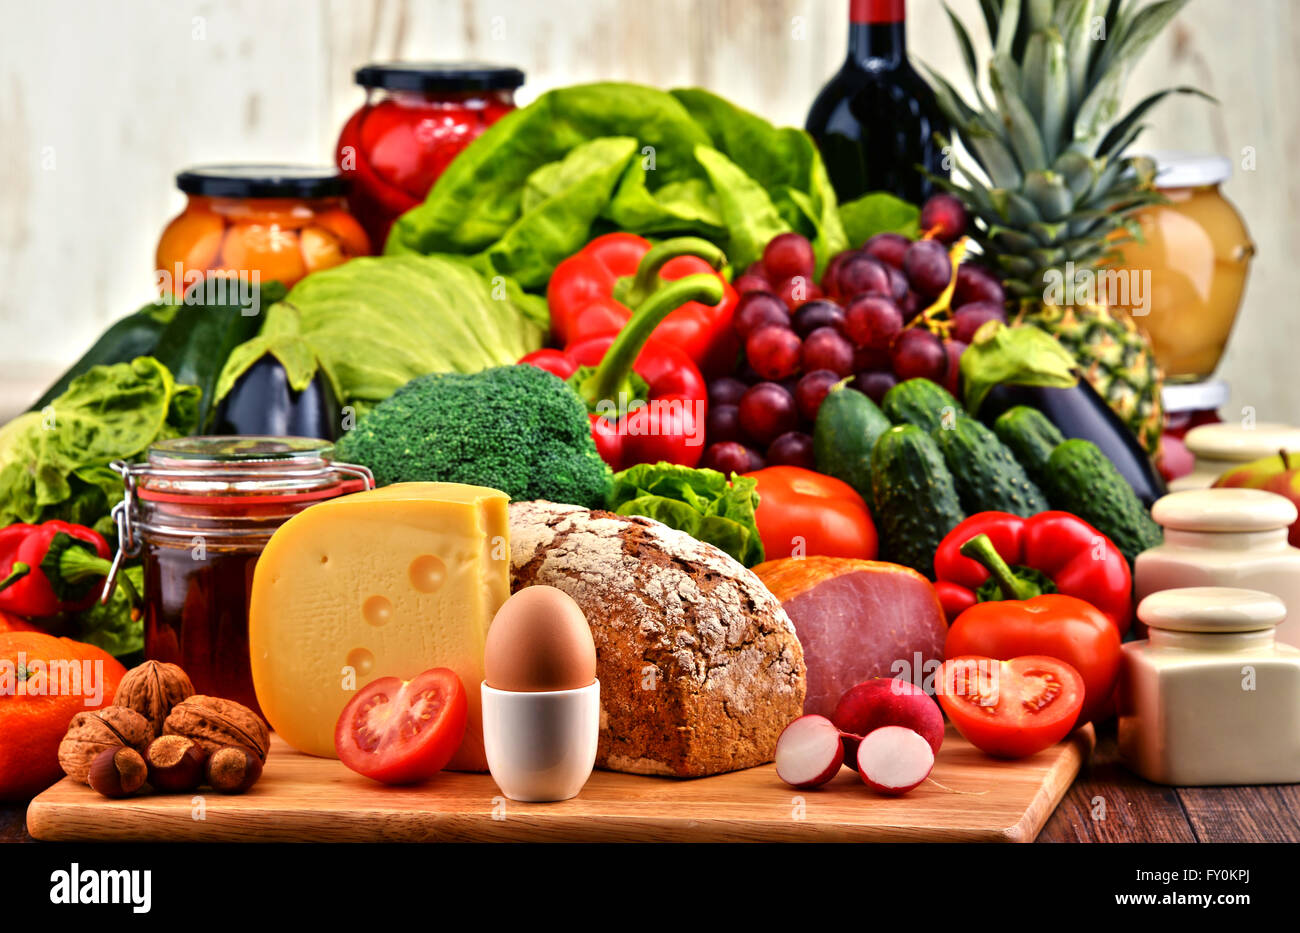 Variety of organic food including vegetables fruit bread dairy and meat. Balanced diet. Stock Photo